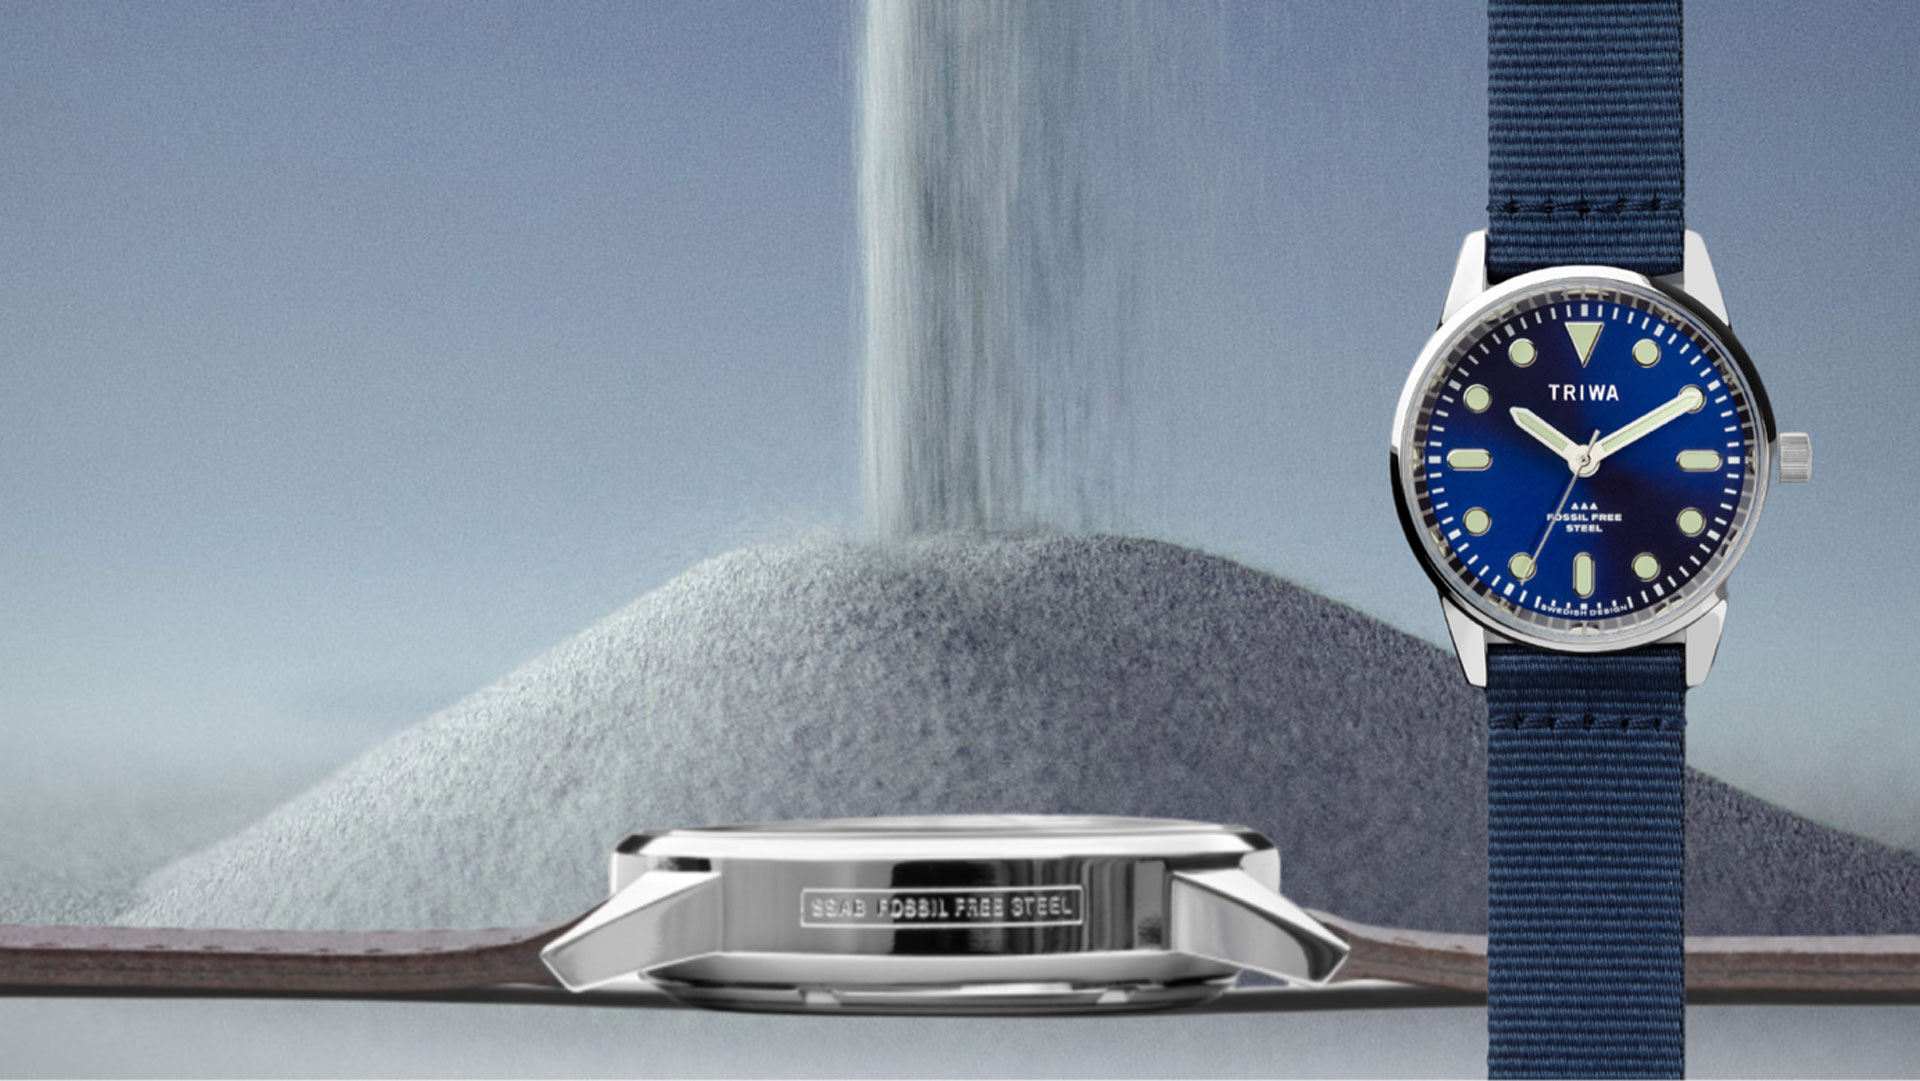 TRIWA sustainable watch – first consumer product to benefit from SSAB's fossil-free steel powder